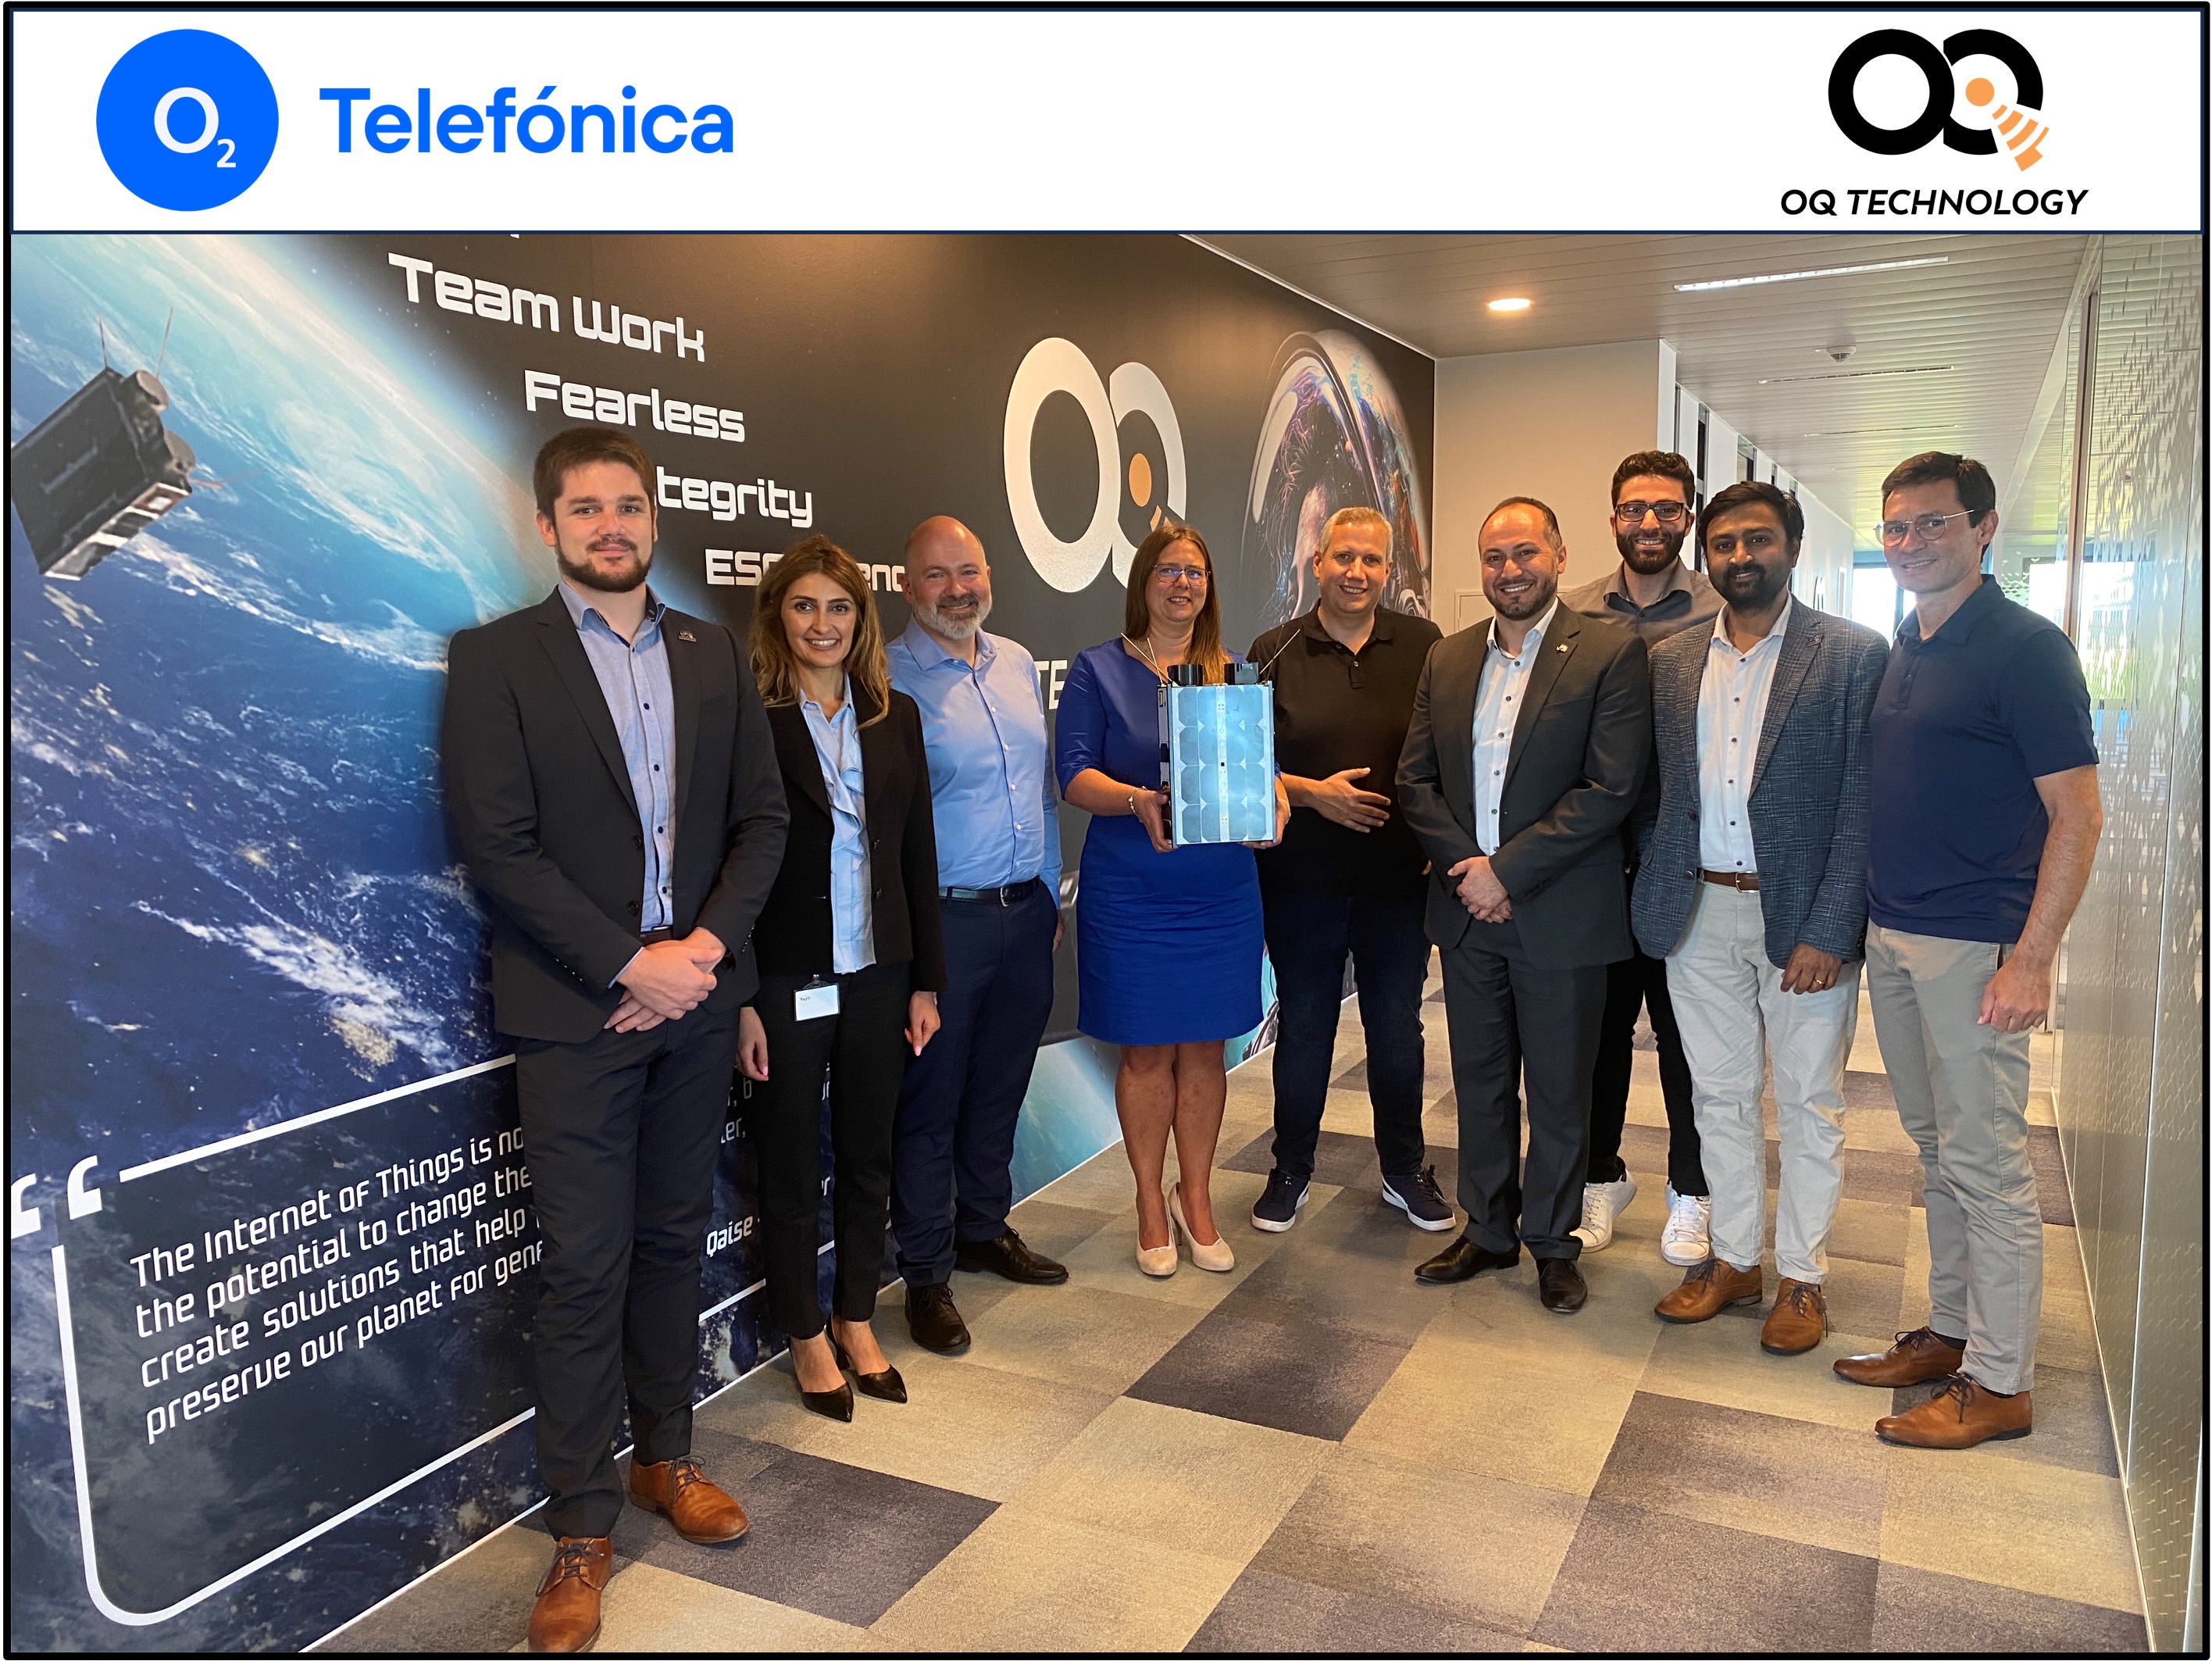 OQ & Telefonica teams during their visit to OQ control center in Luxembourg 